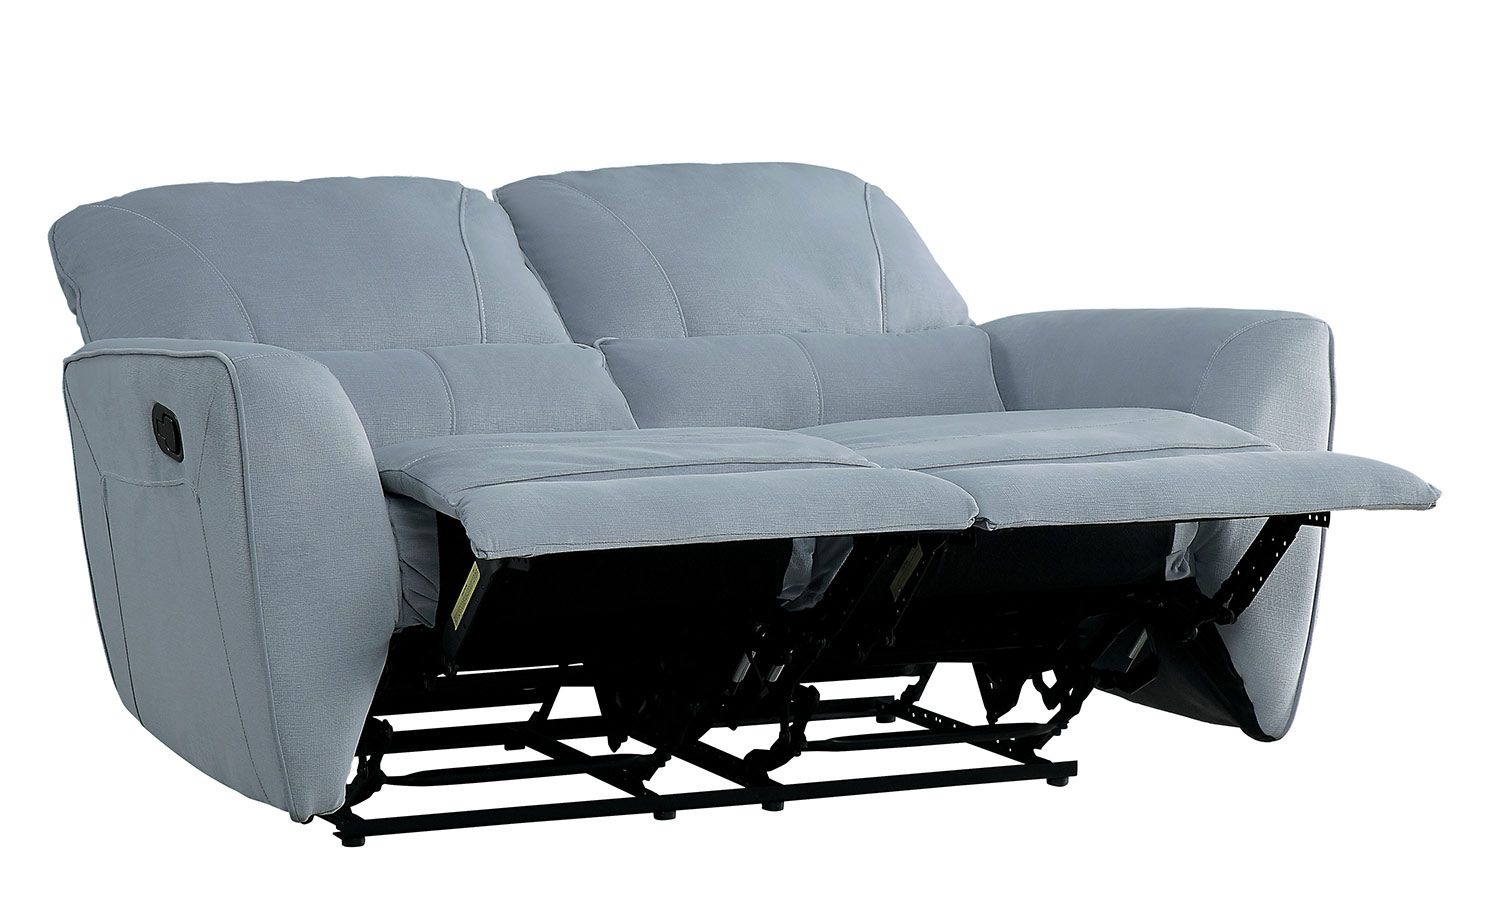 Homelegance Dowling Double Reclining Love Seat - Light Gray